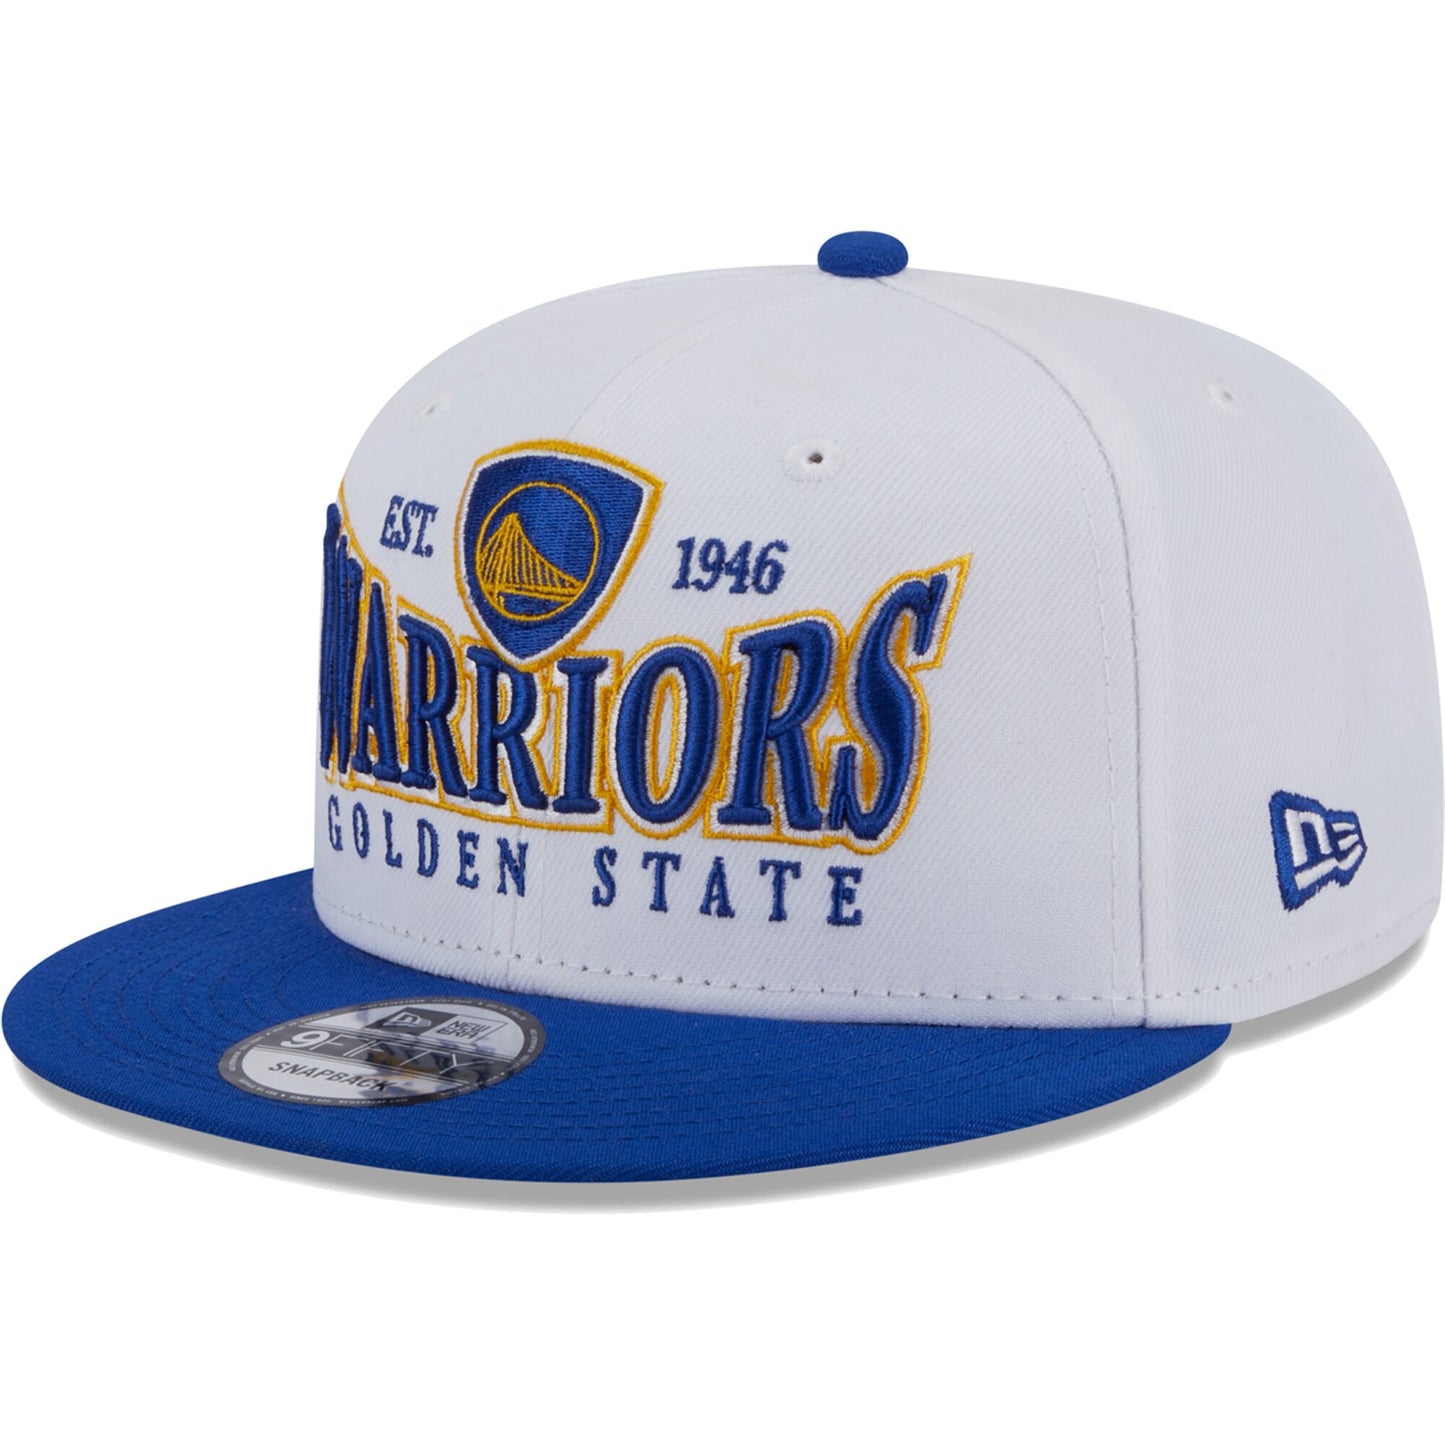 Golden State Warriors New Era Crest Stack 9FIFTY Snapback Hat - White/Royal